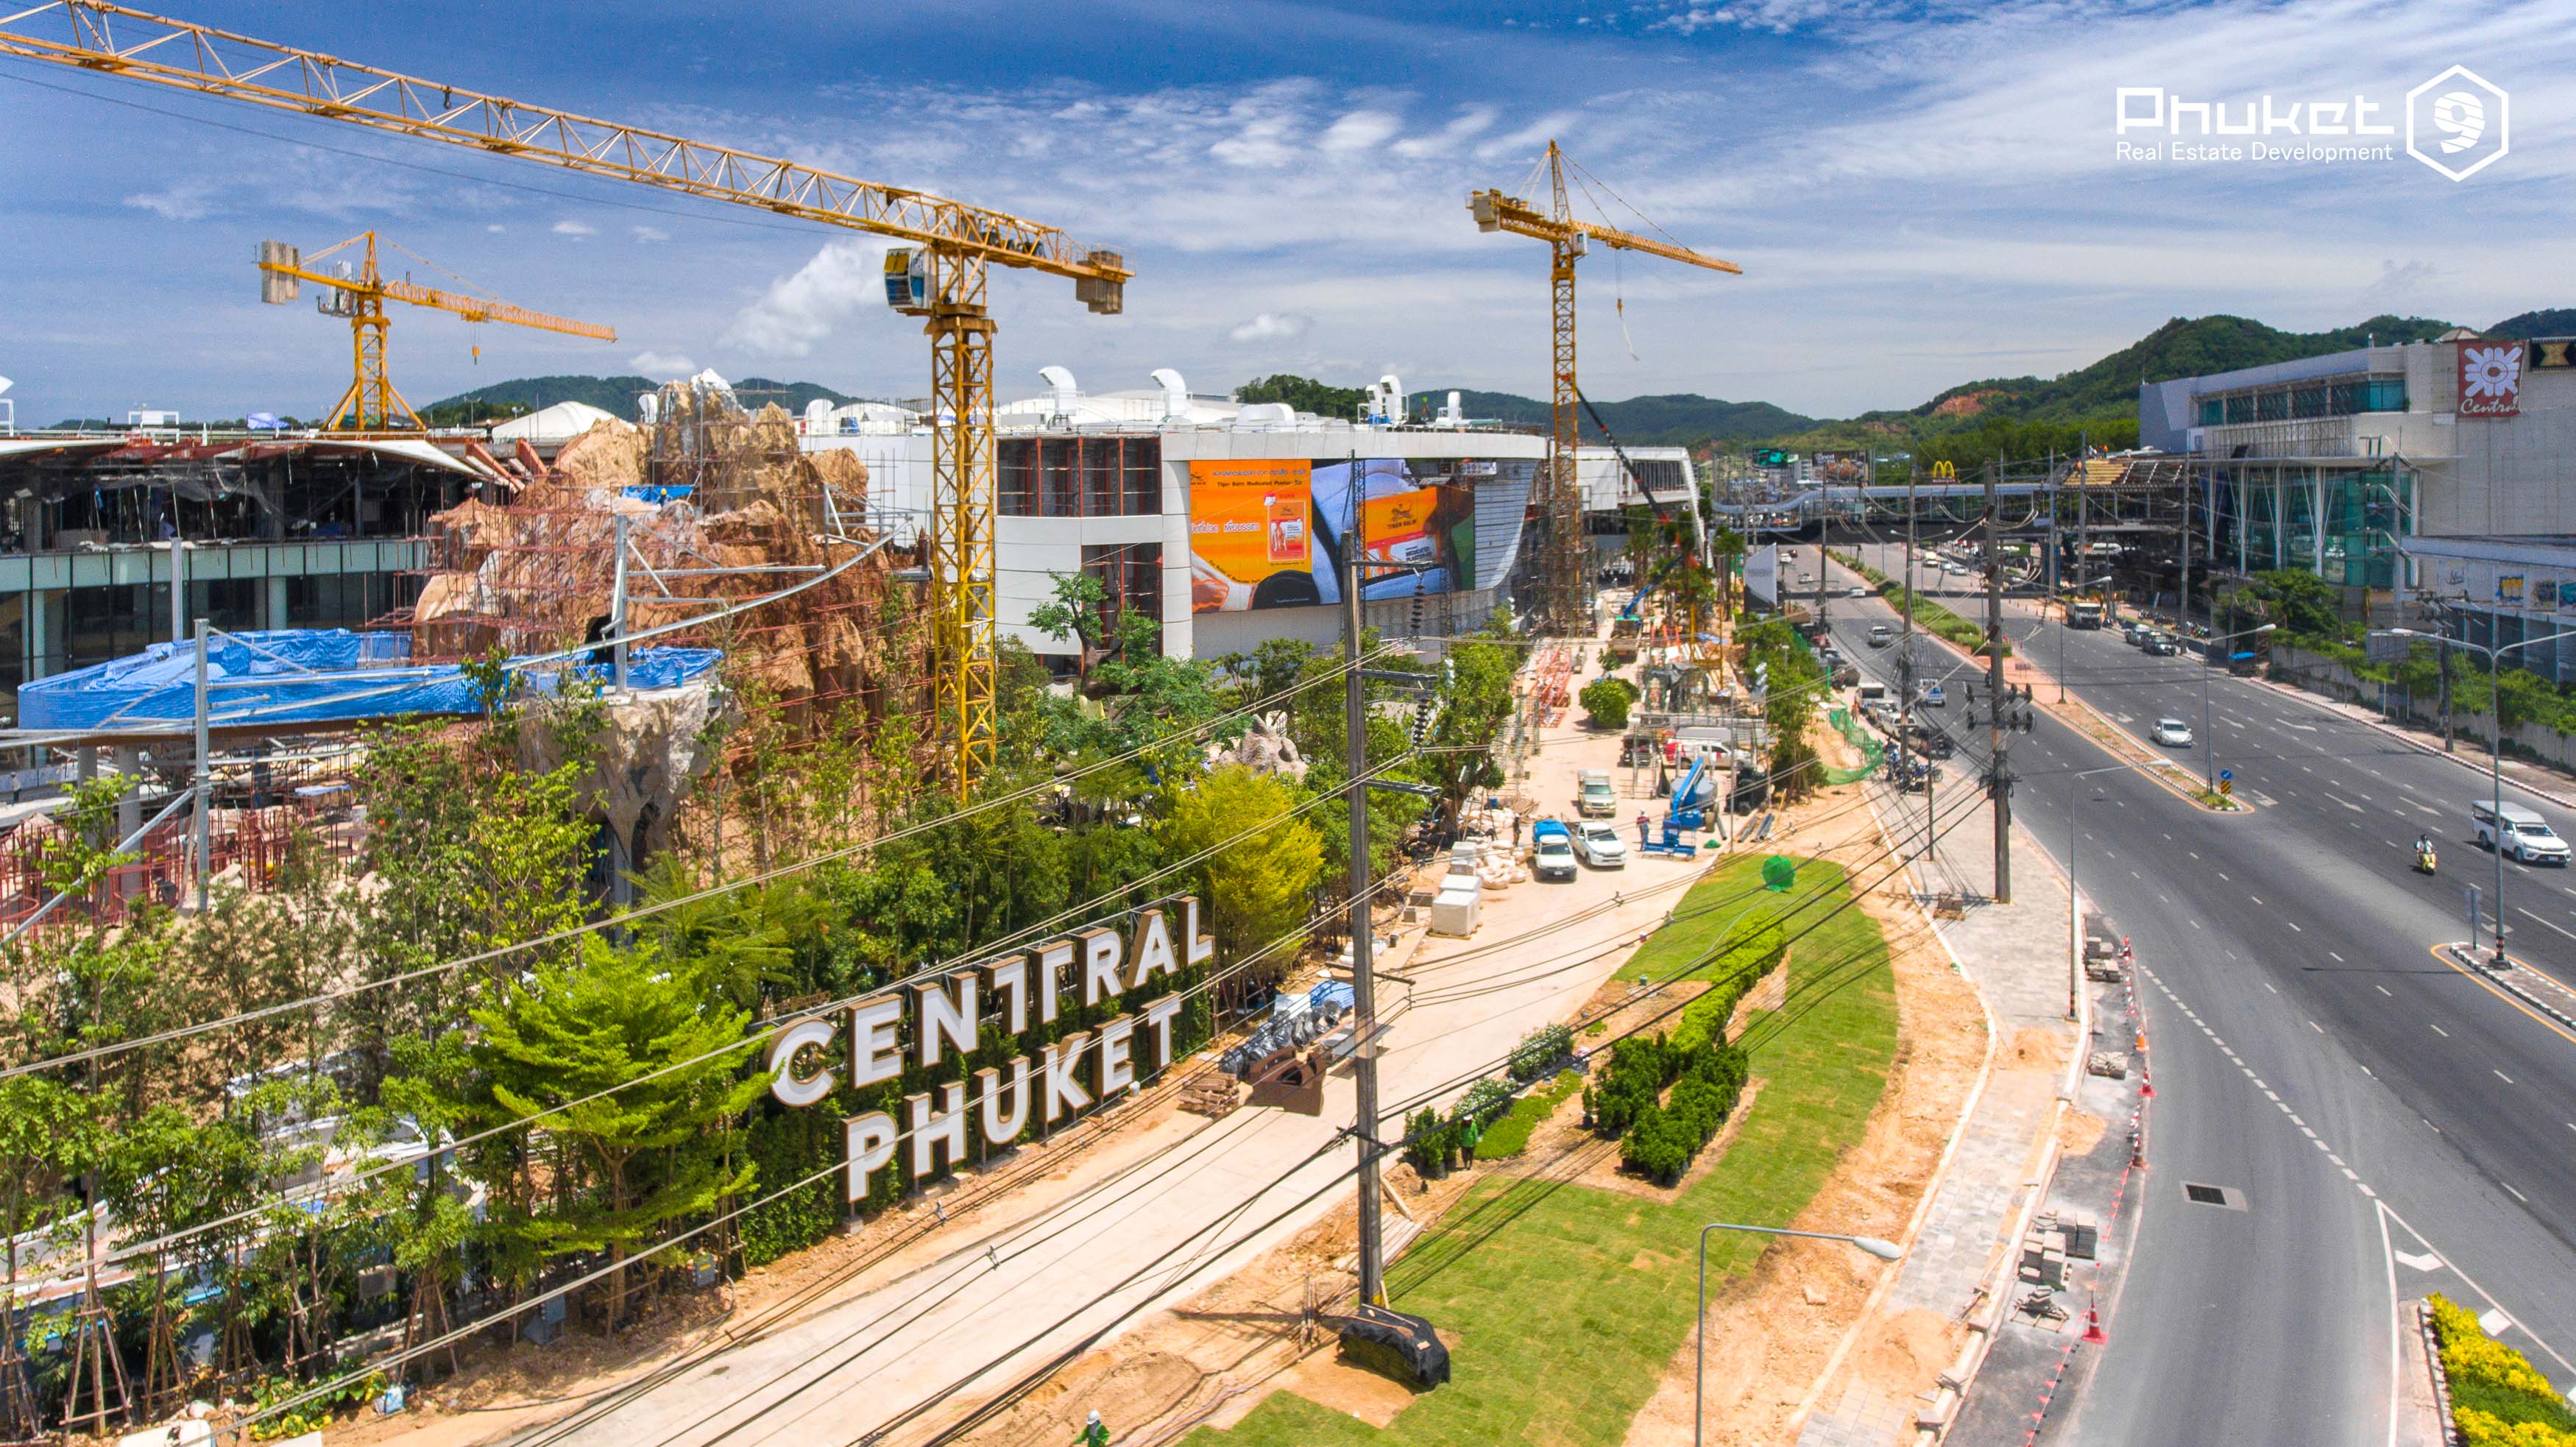 The-expansion-of-the-shopping-center-Central-Festival-Phuket-04 –  aasarchitecture